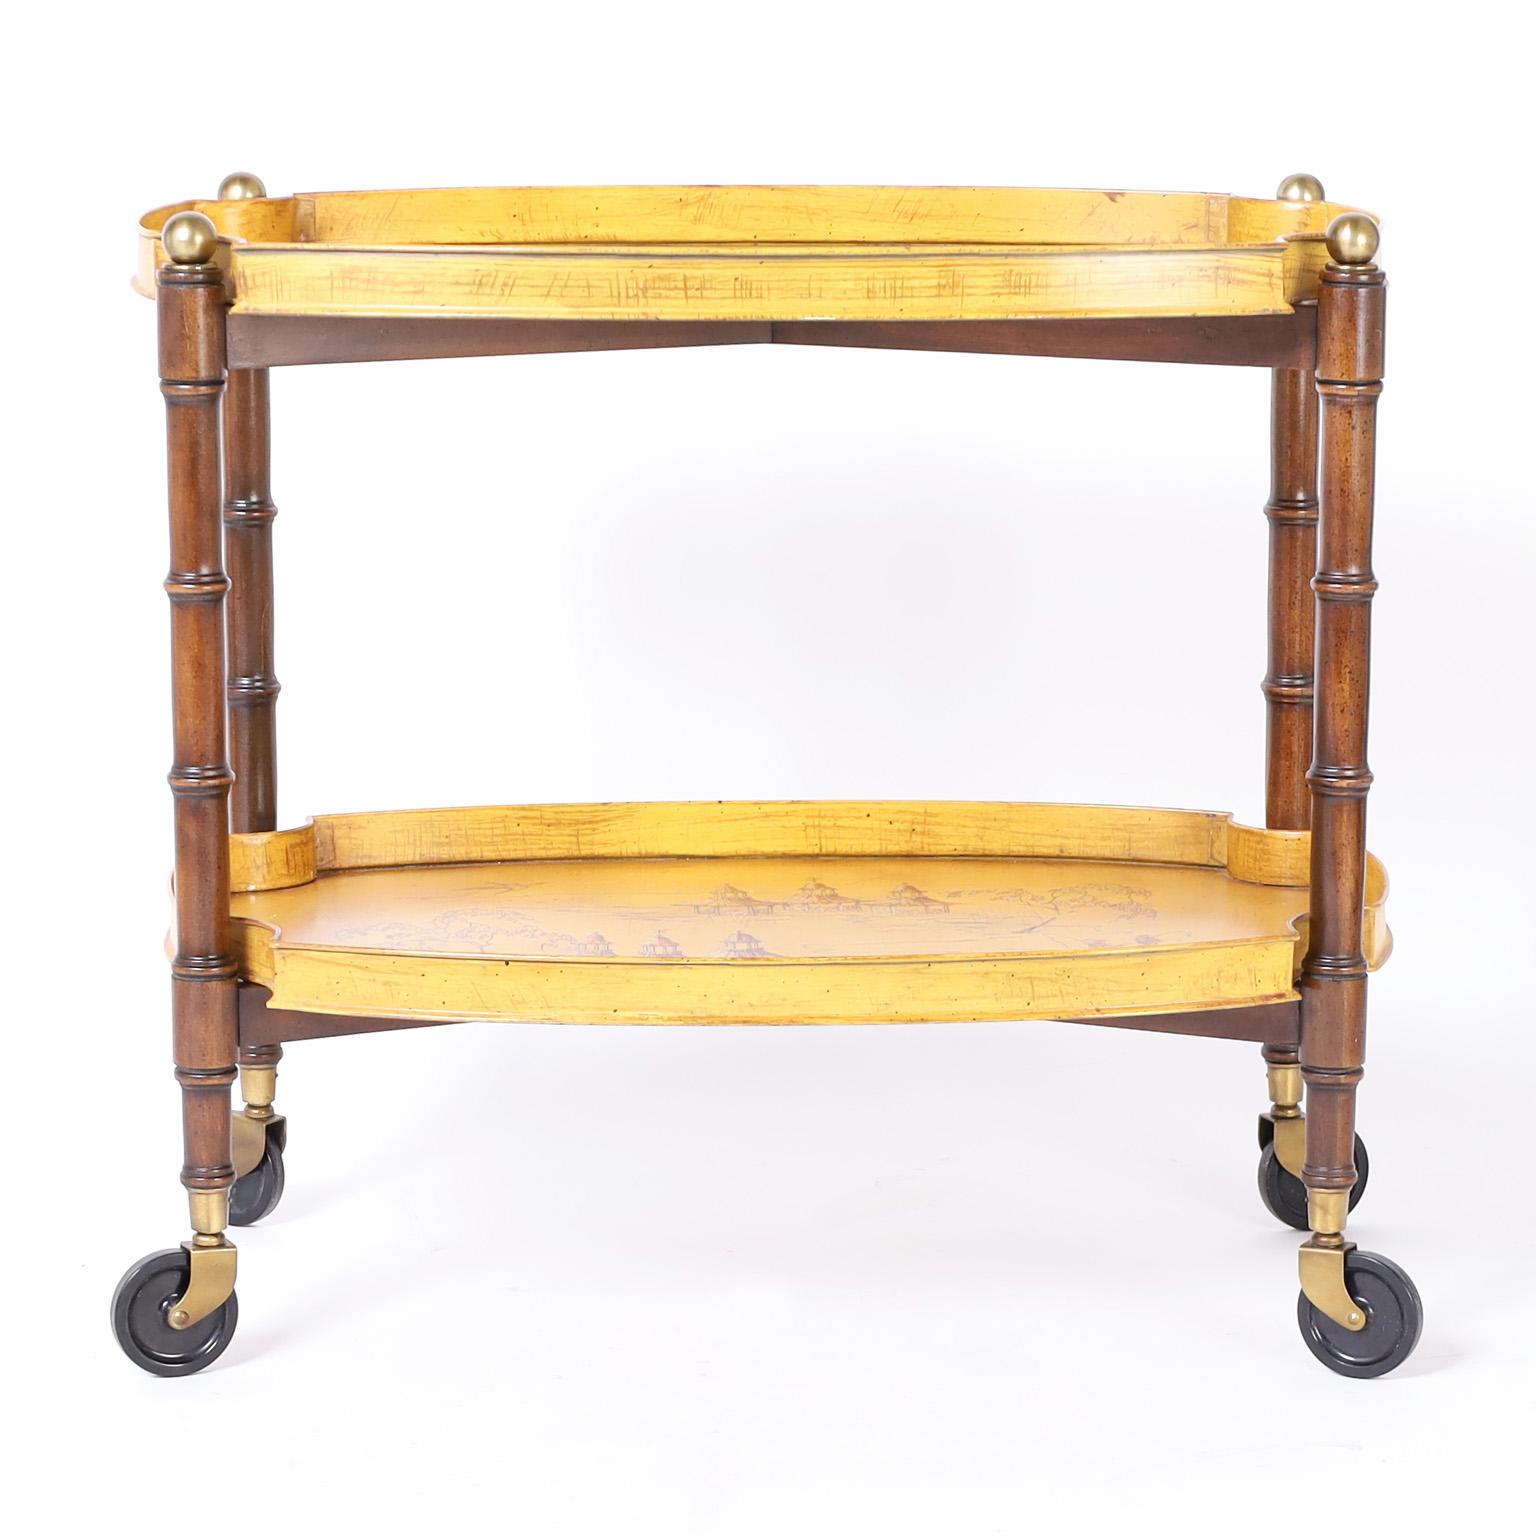 Bar cart with dynamic appeal featuring two removable tole trays decorated with chinoiserie against a mustard background. The faux bamboo frame is turned walnut with brass finials set on casters. Signed Brandt on the bottom.